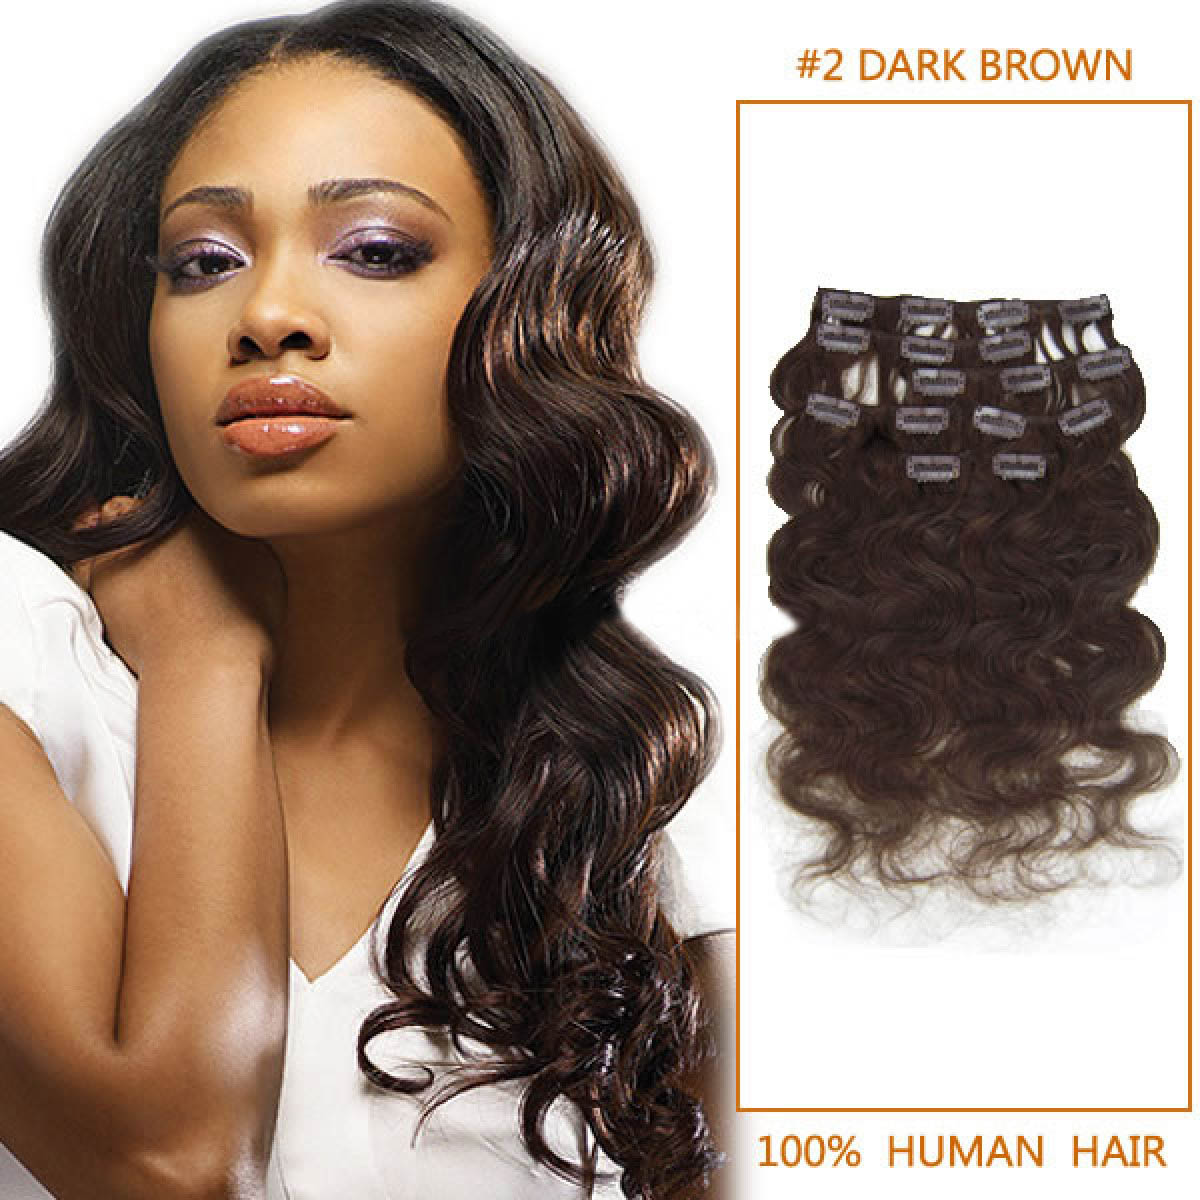 20 Inch #2 Dark Brown Wavy Clip In Remy Human Hair Extensions 7pcs ...